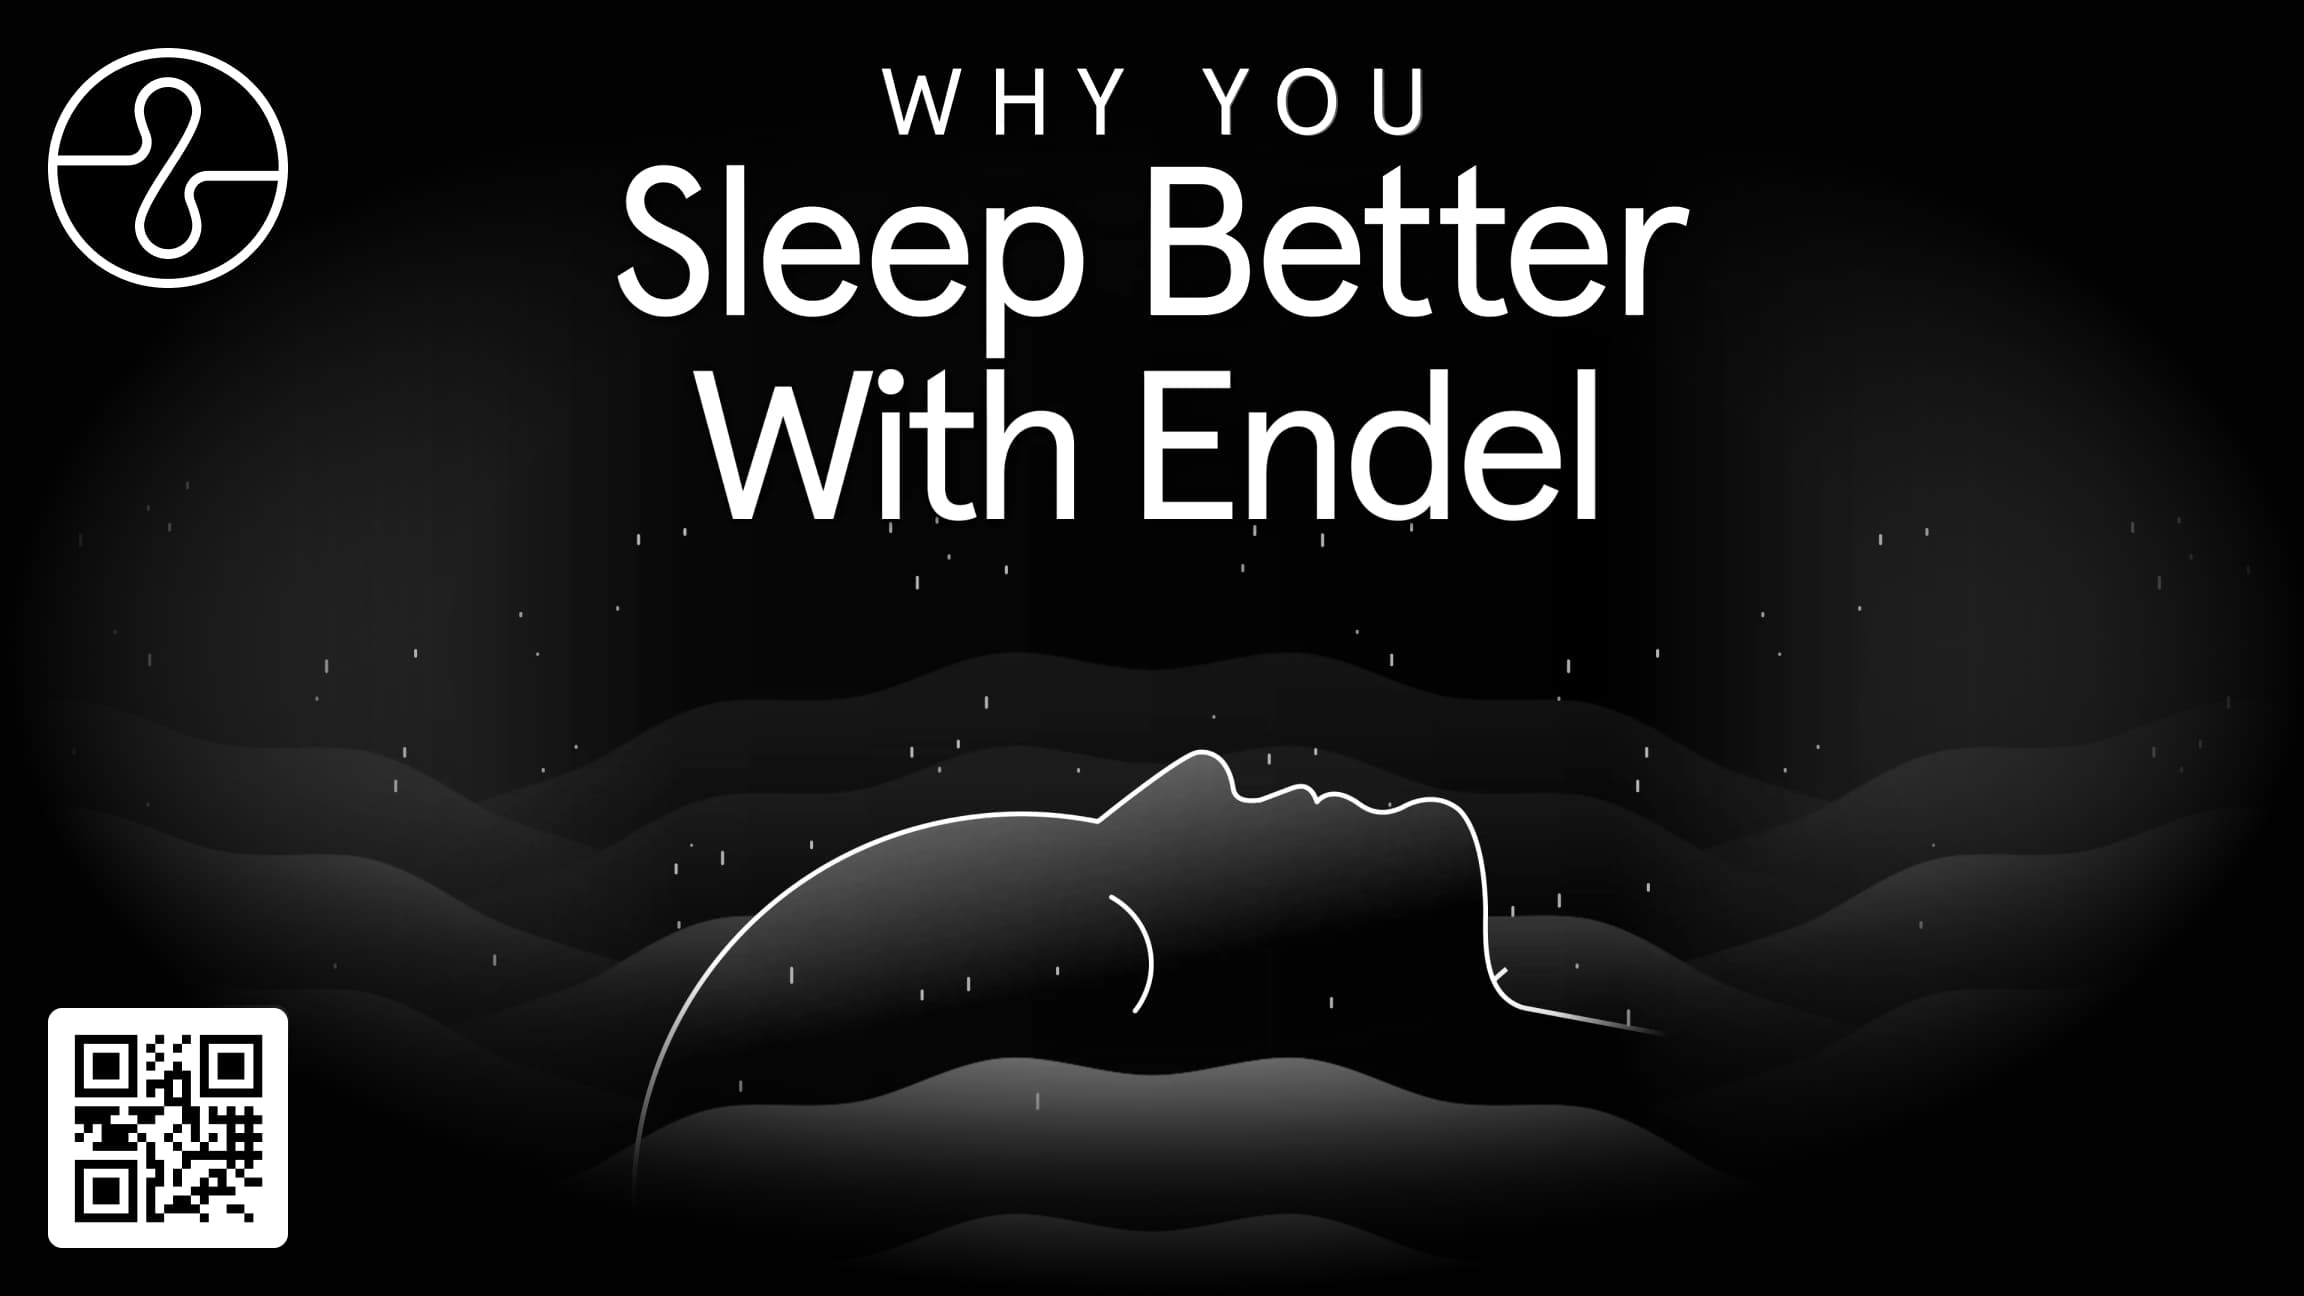 Why we sleep better with endel